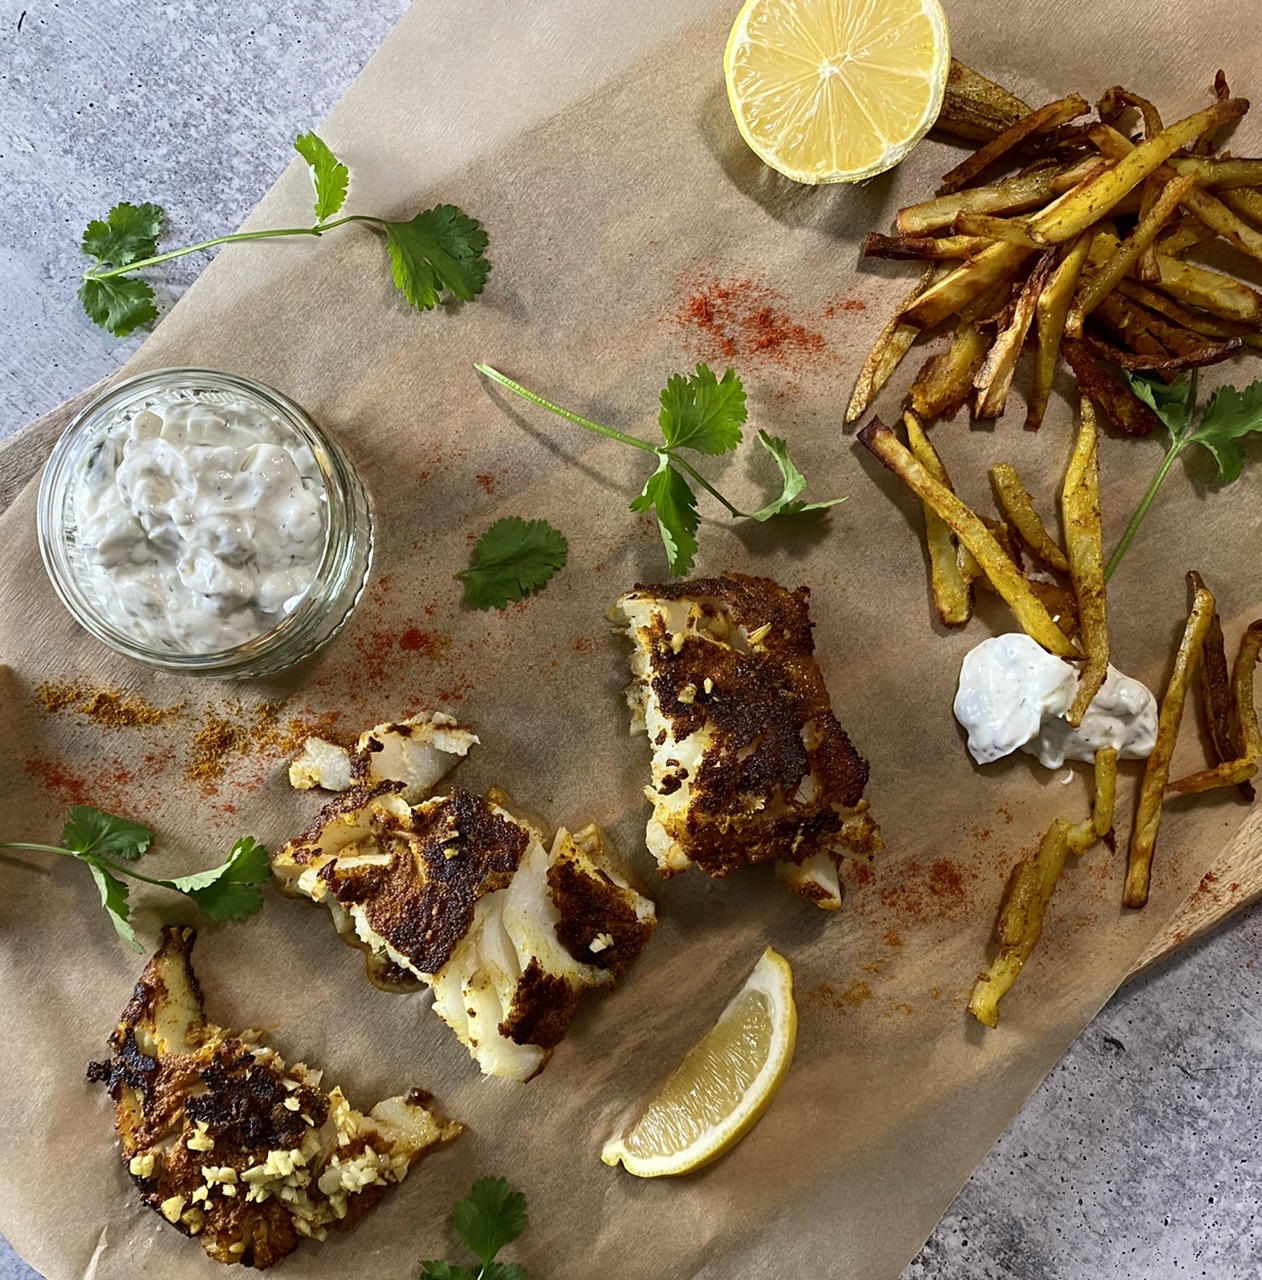 Indian fish and turmeric French fries on parchment paper with tzatziki and lemons